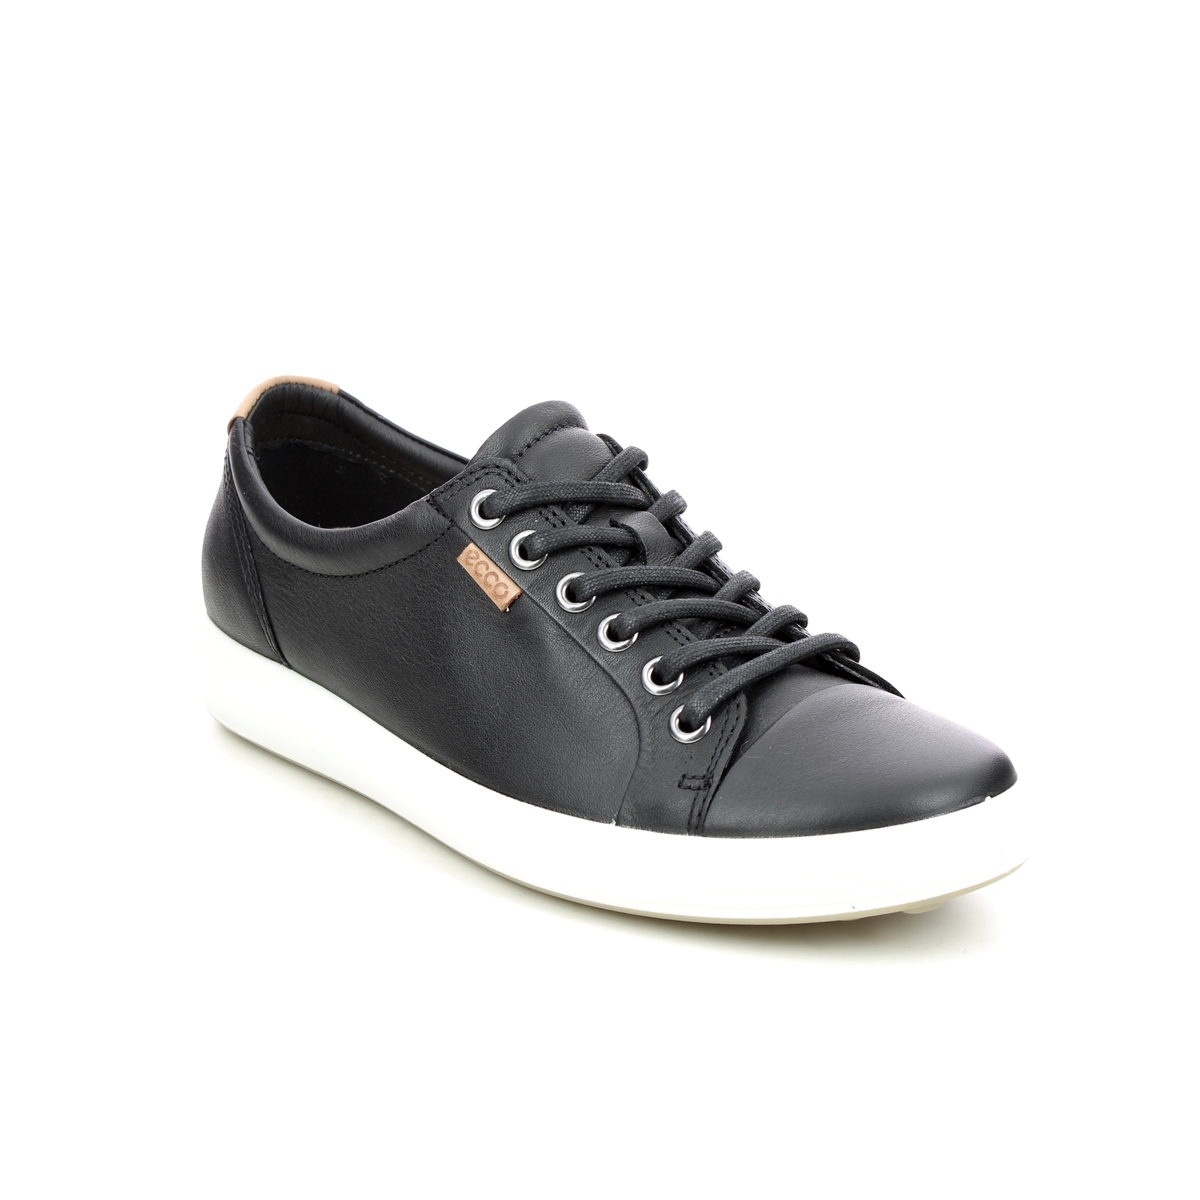 ECCO Soft 7 Lace Black leather Womens trainers 430003-01001 in a Plain Leather in Size 42